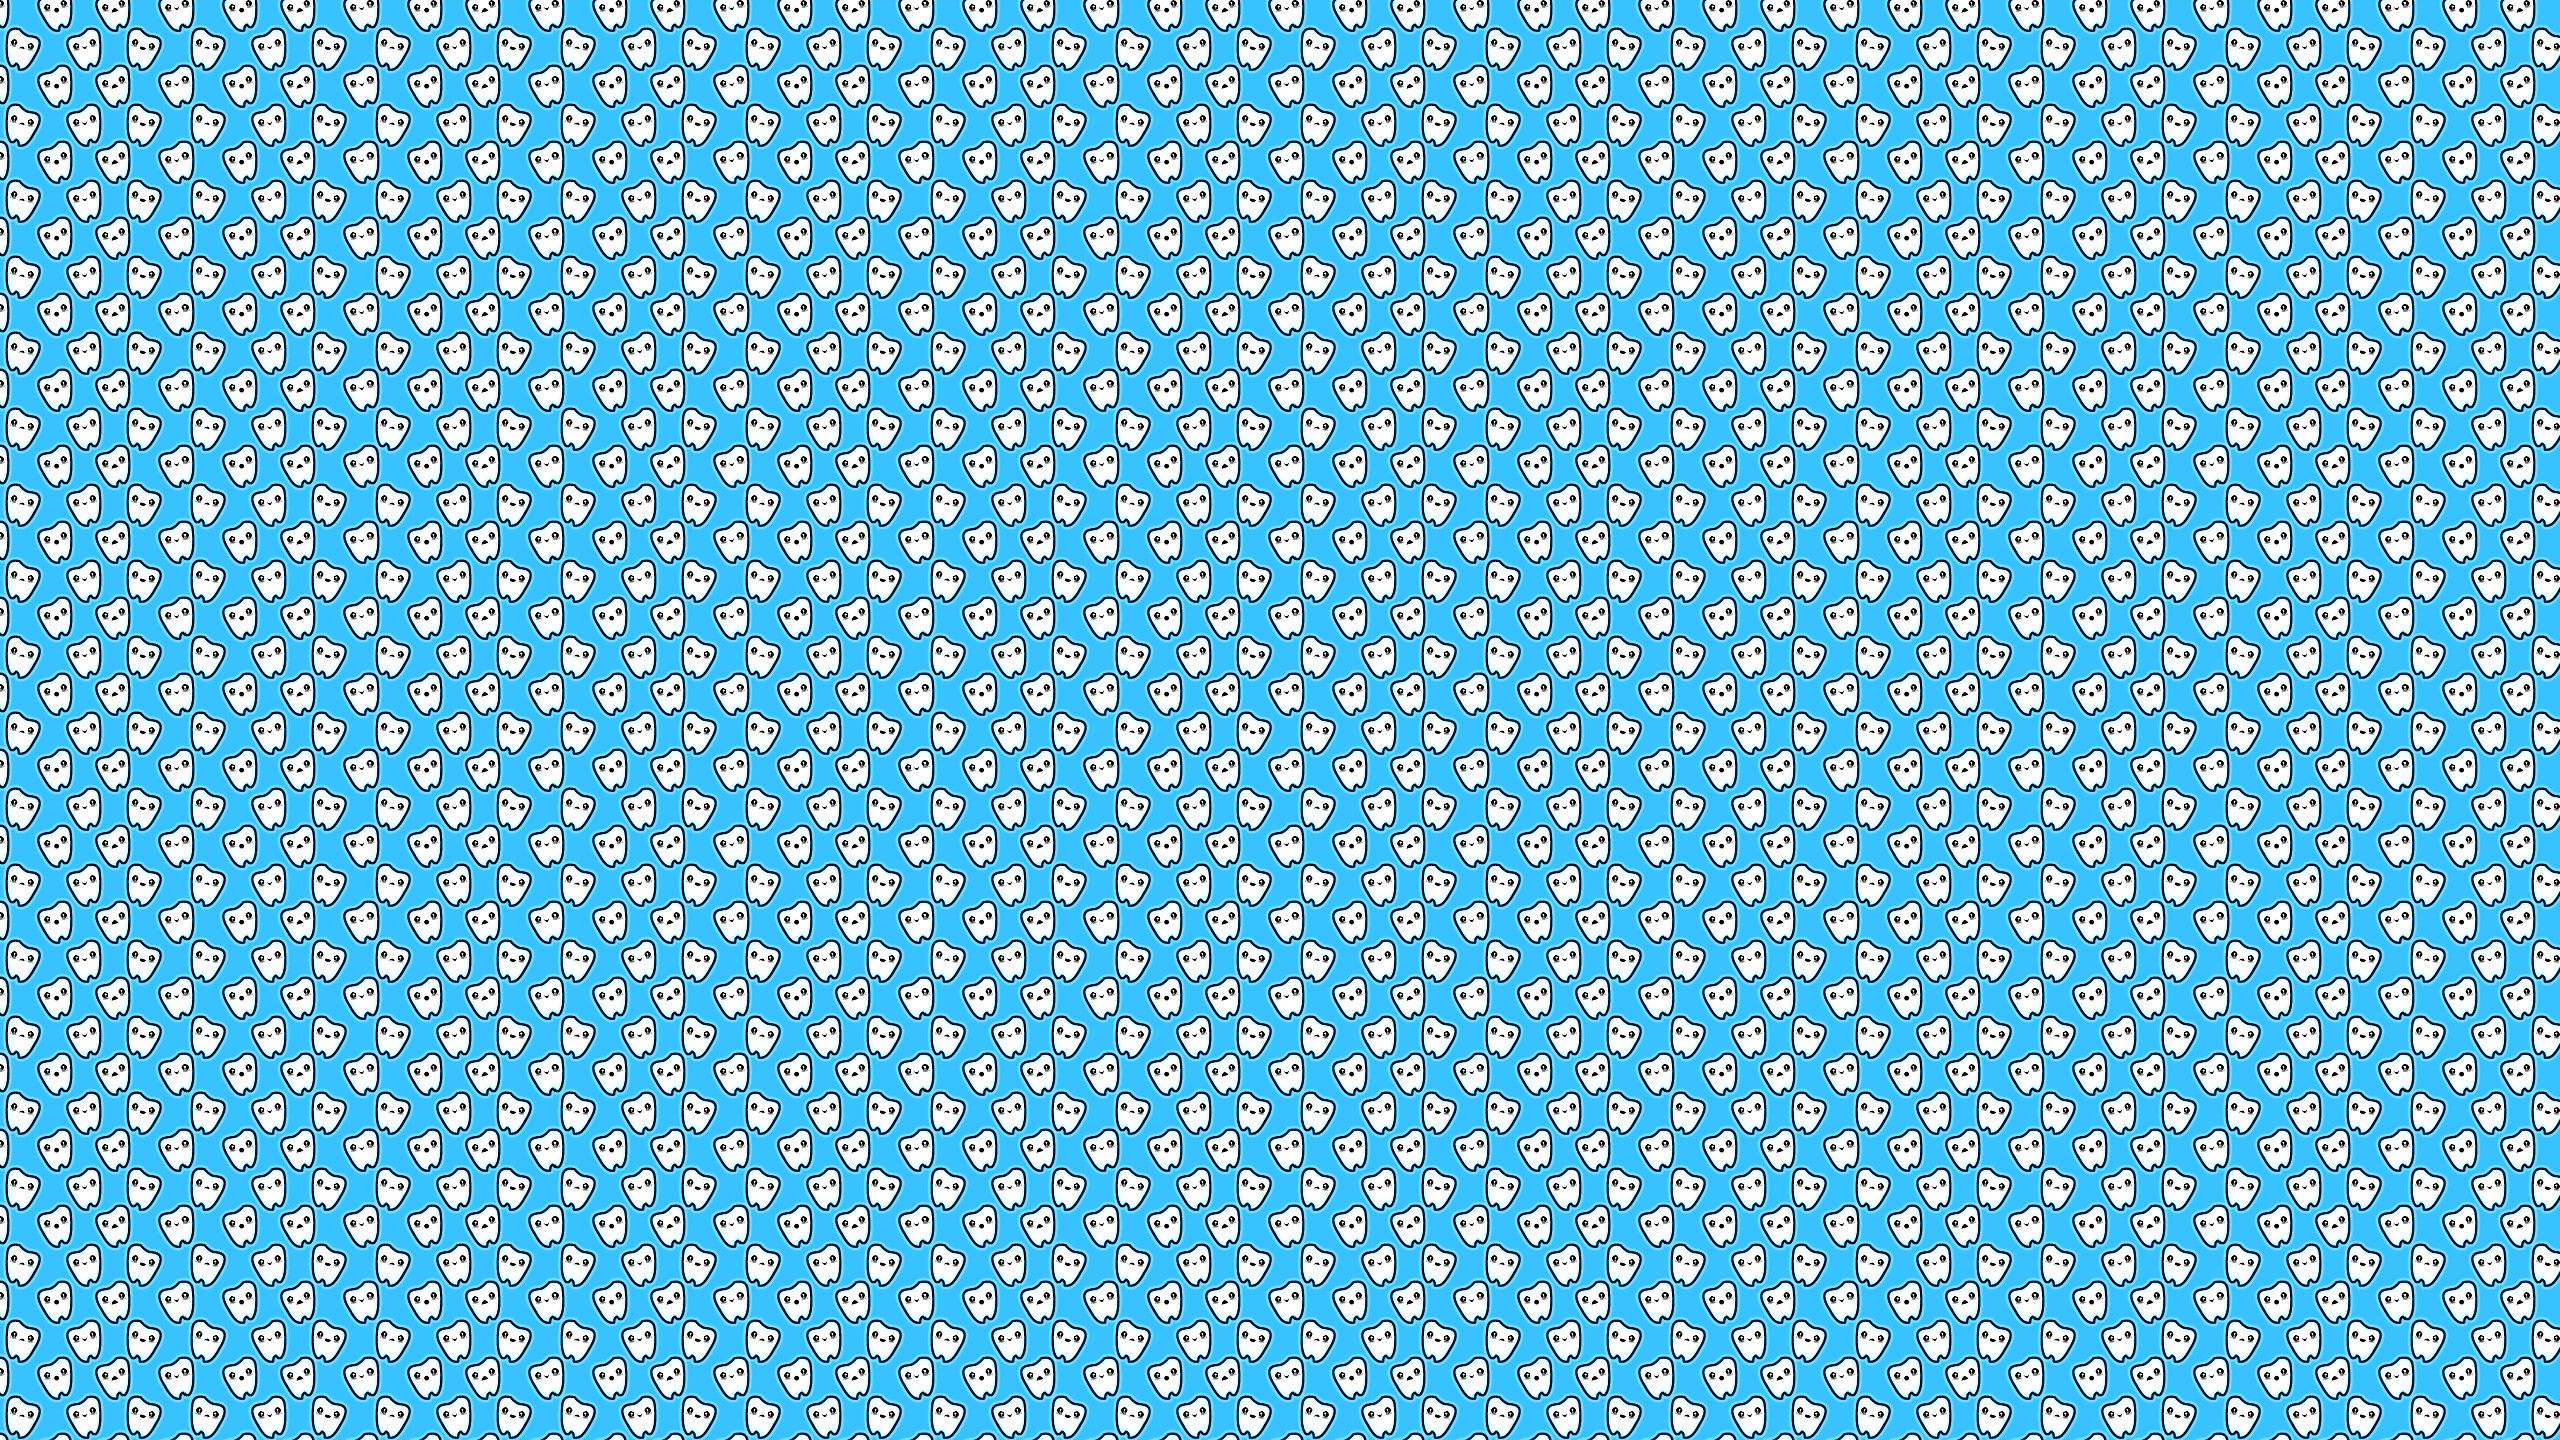 A blue and white patterned background - Dentist